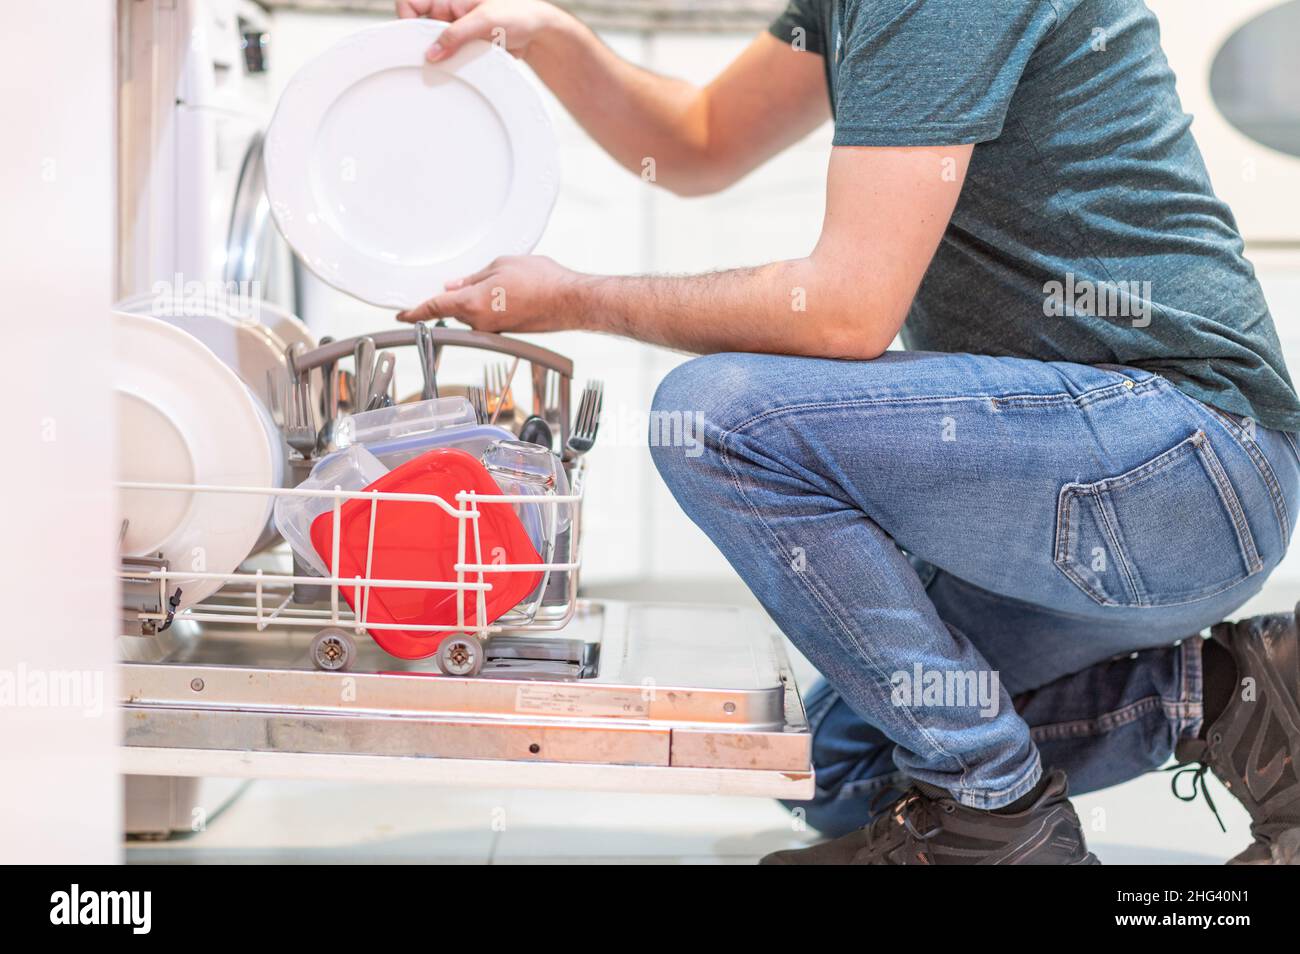 Unrecognizable adult male setting the dishwasher. Man doing housework. Concept of feminist equality Stock Photo